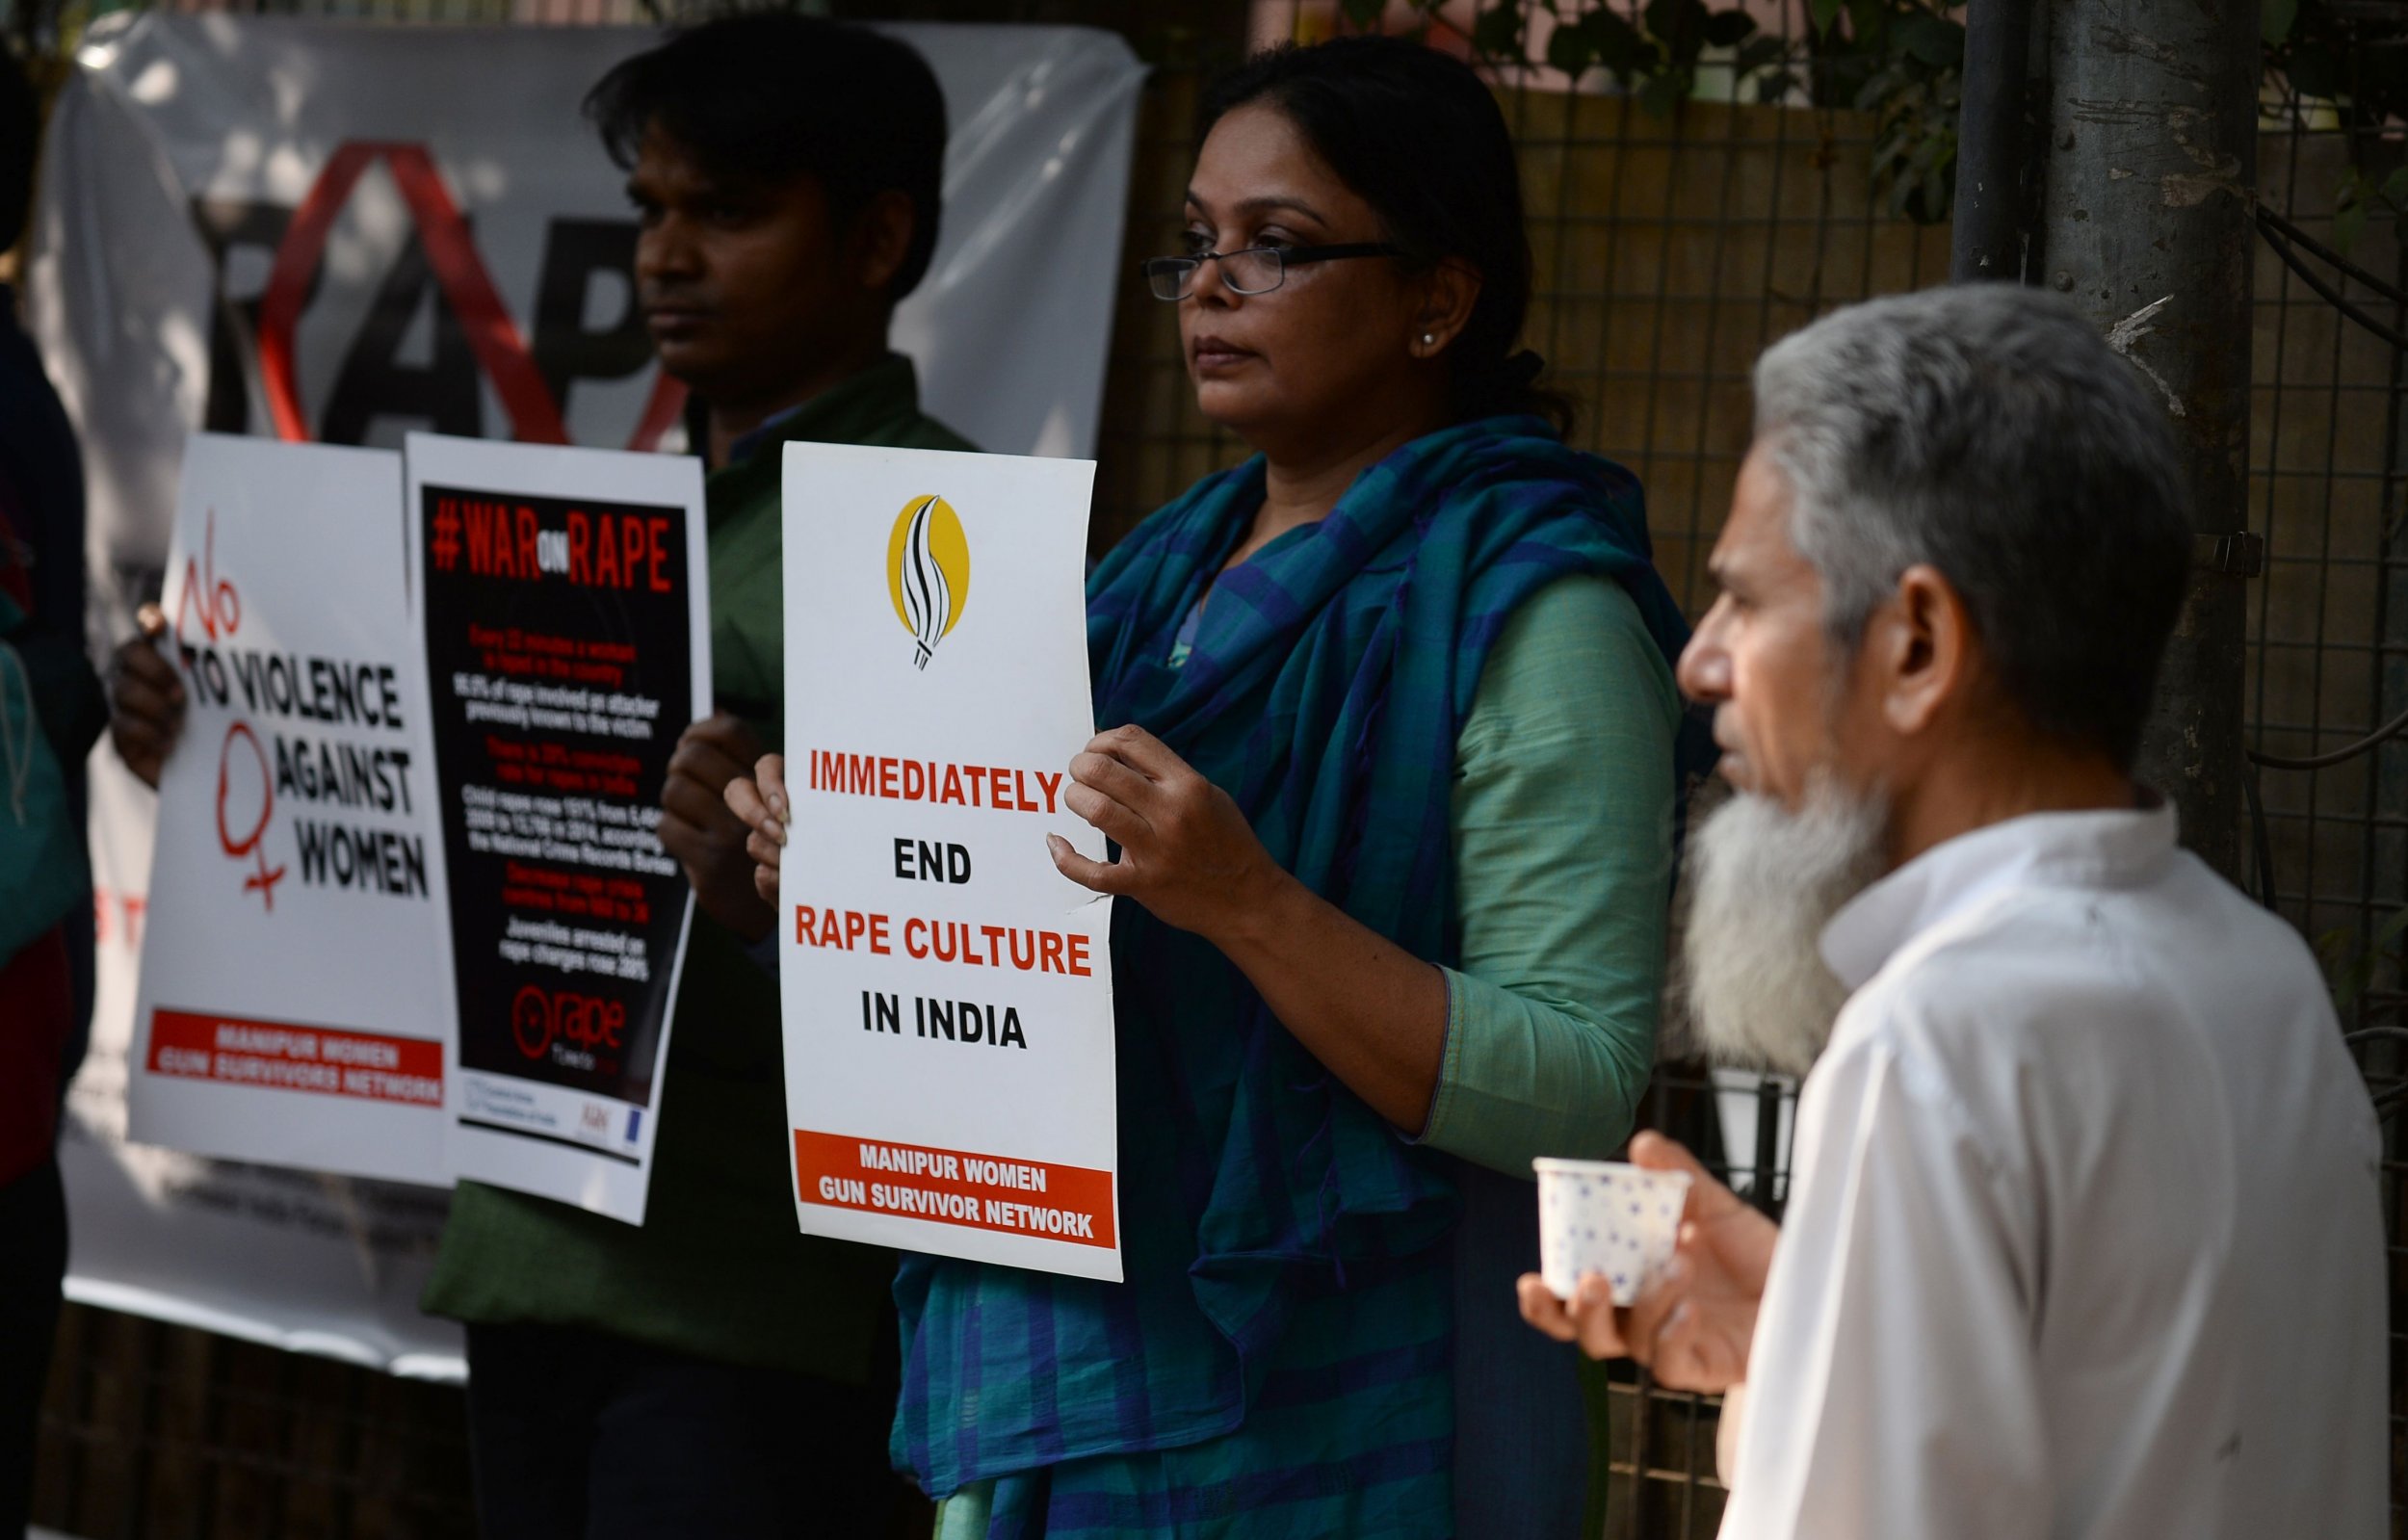 Violence against women protest India